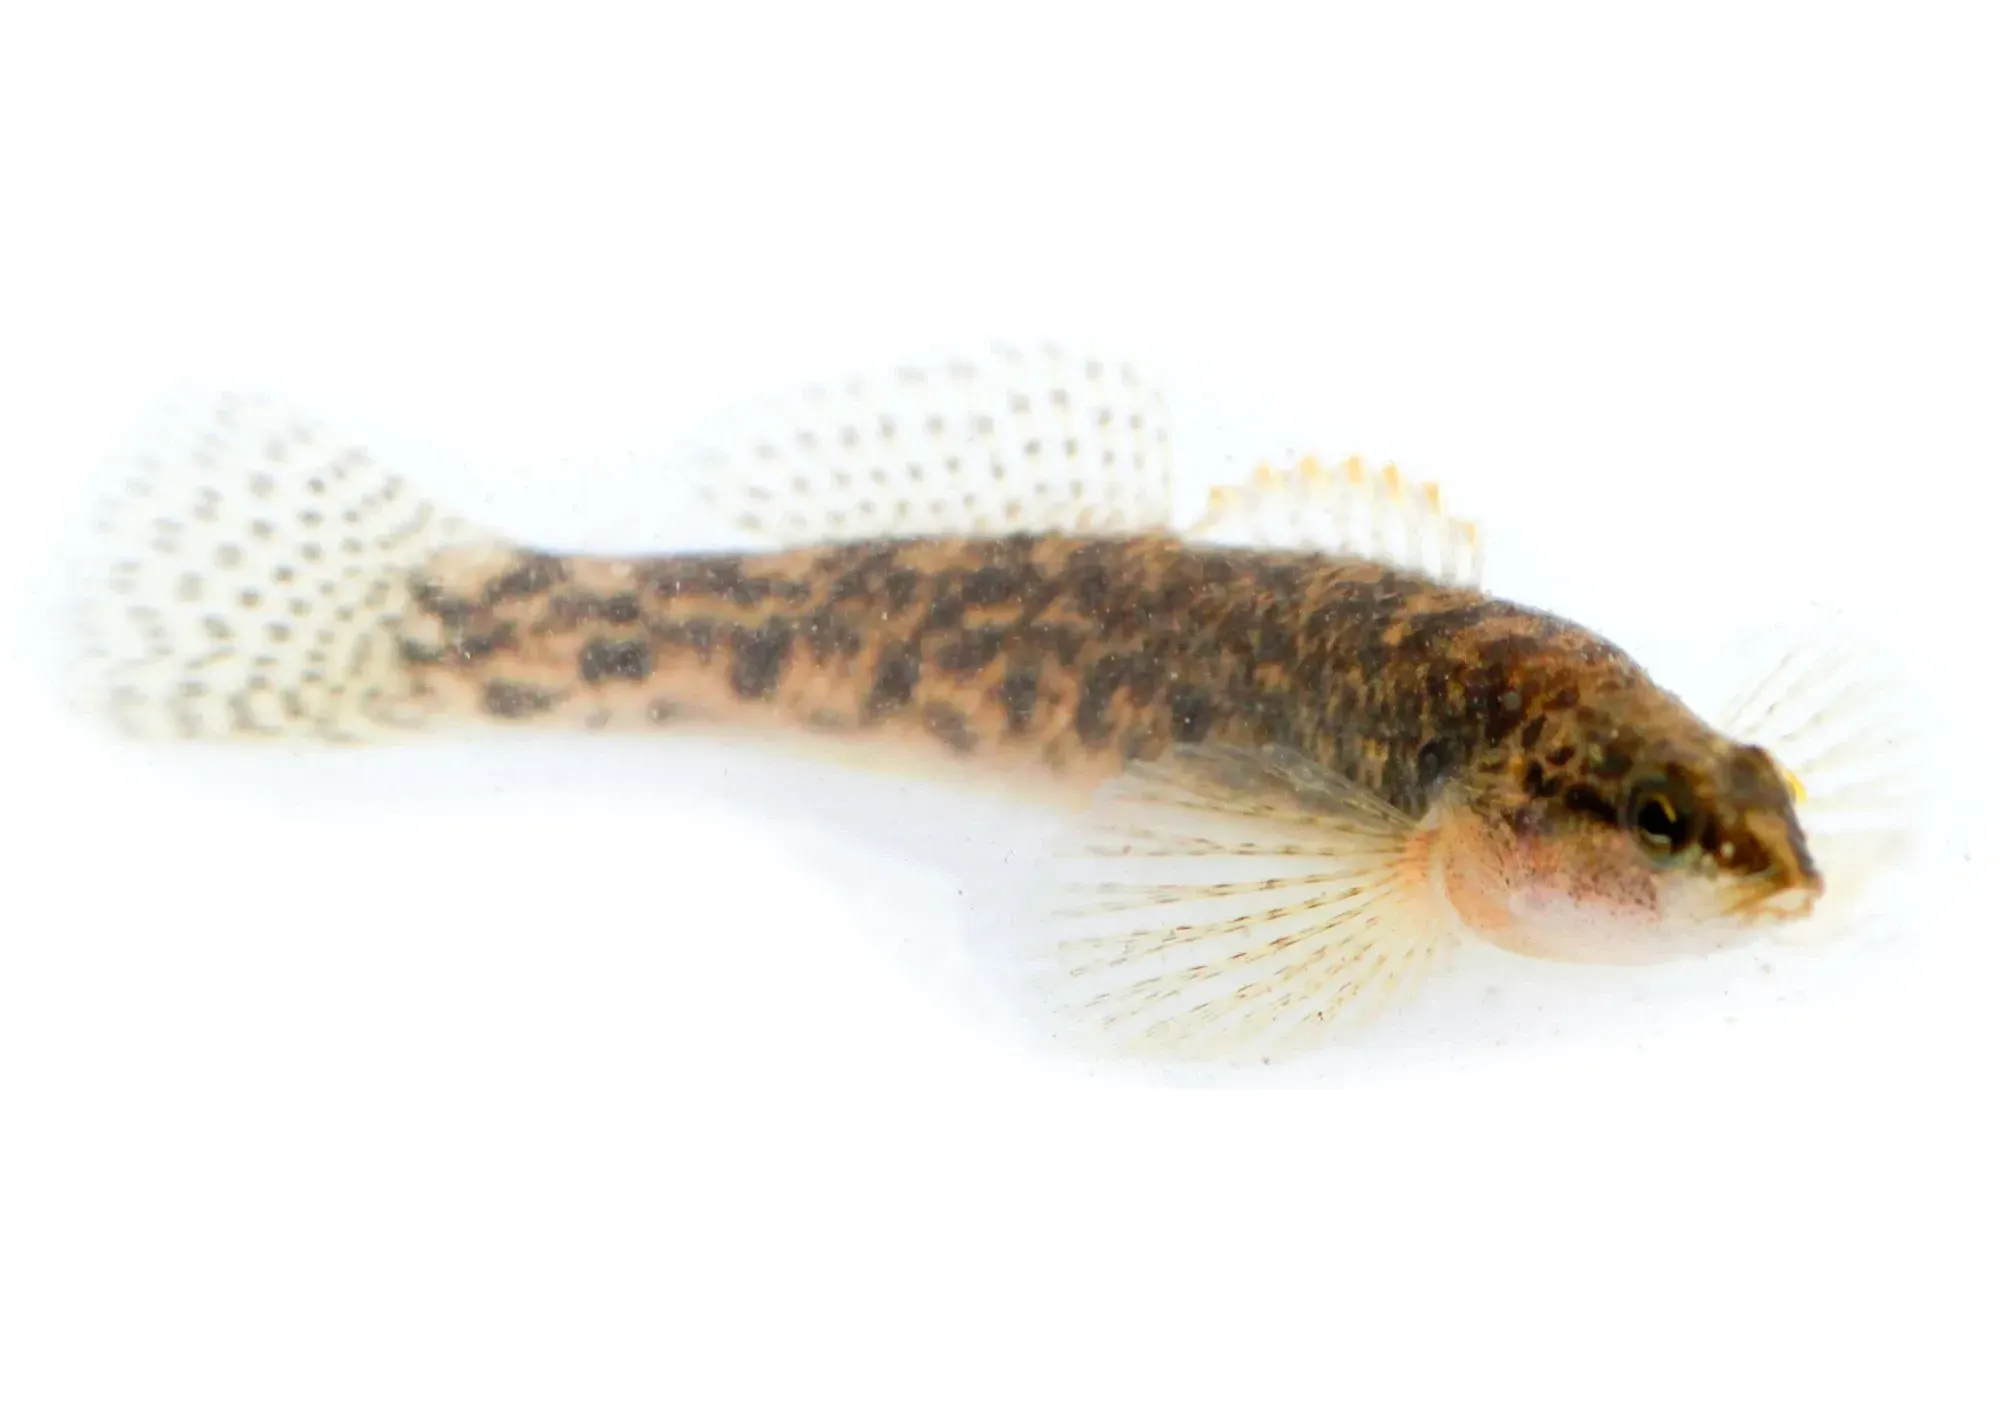 The fantail darter fish is by far one of the most interesting aquatic animals out there.